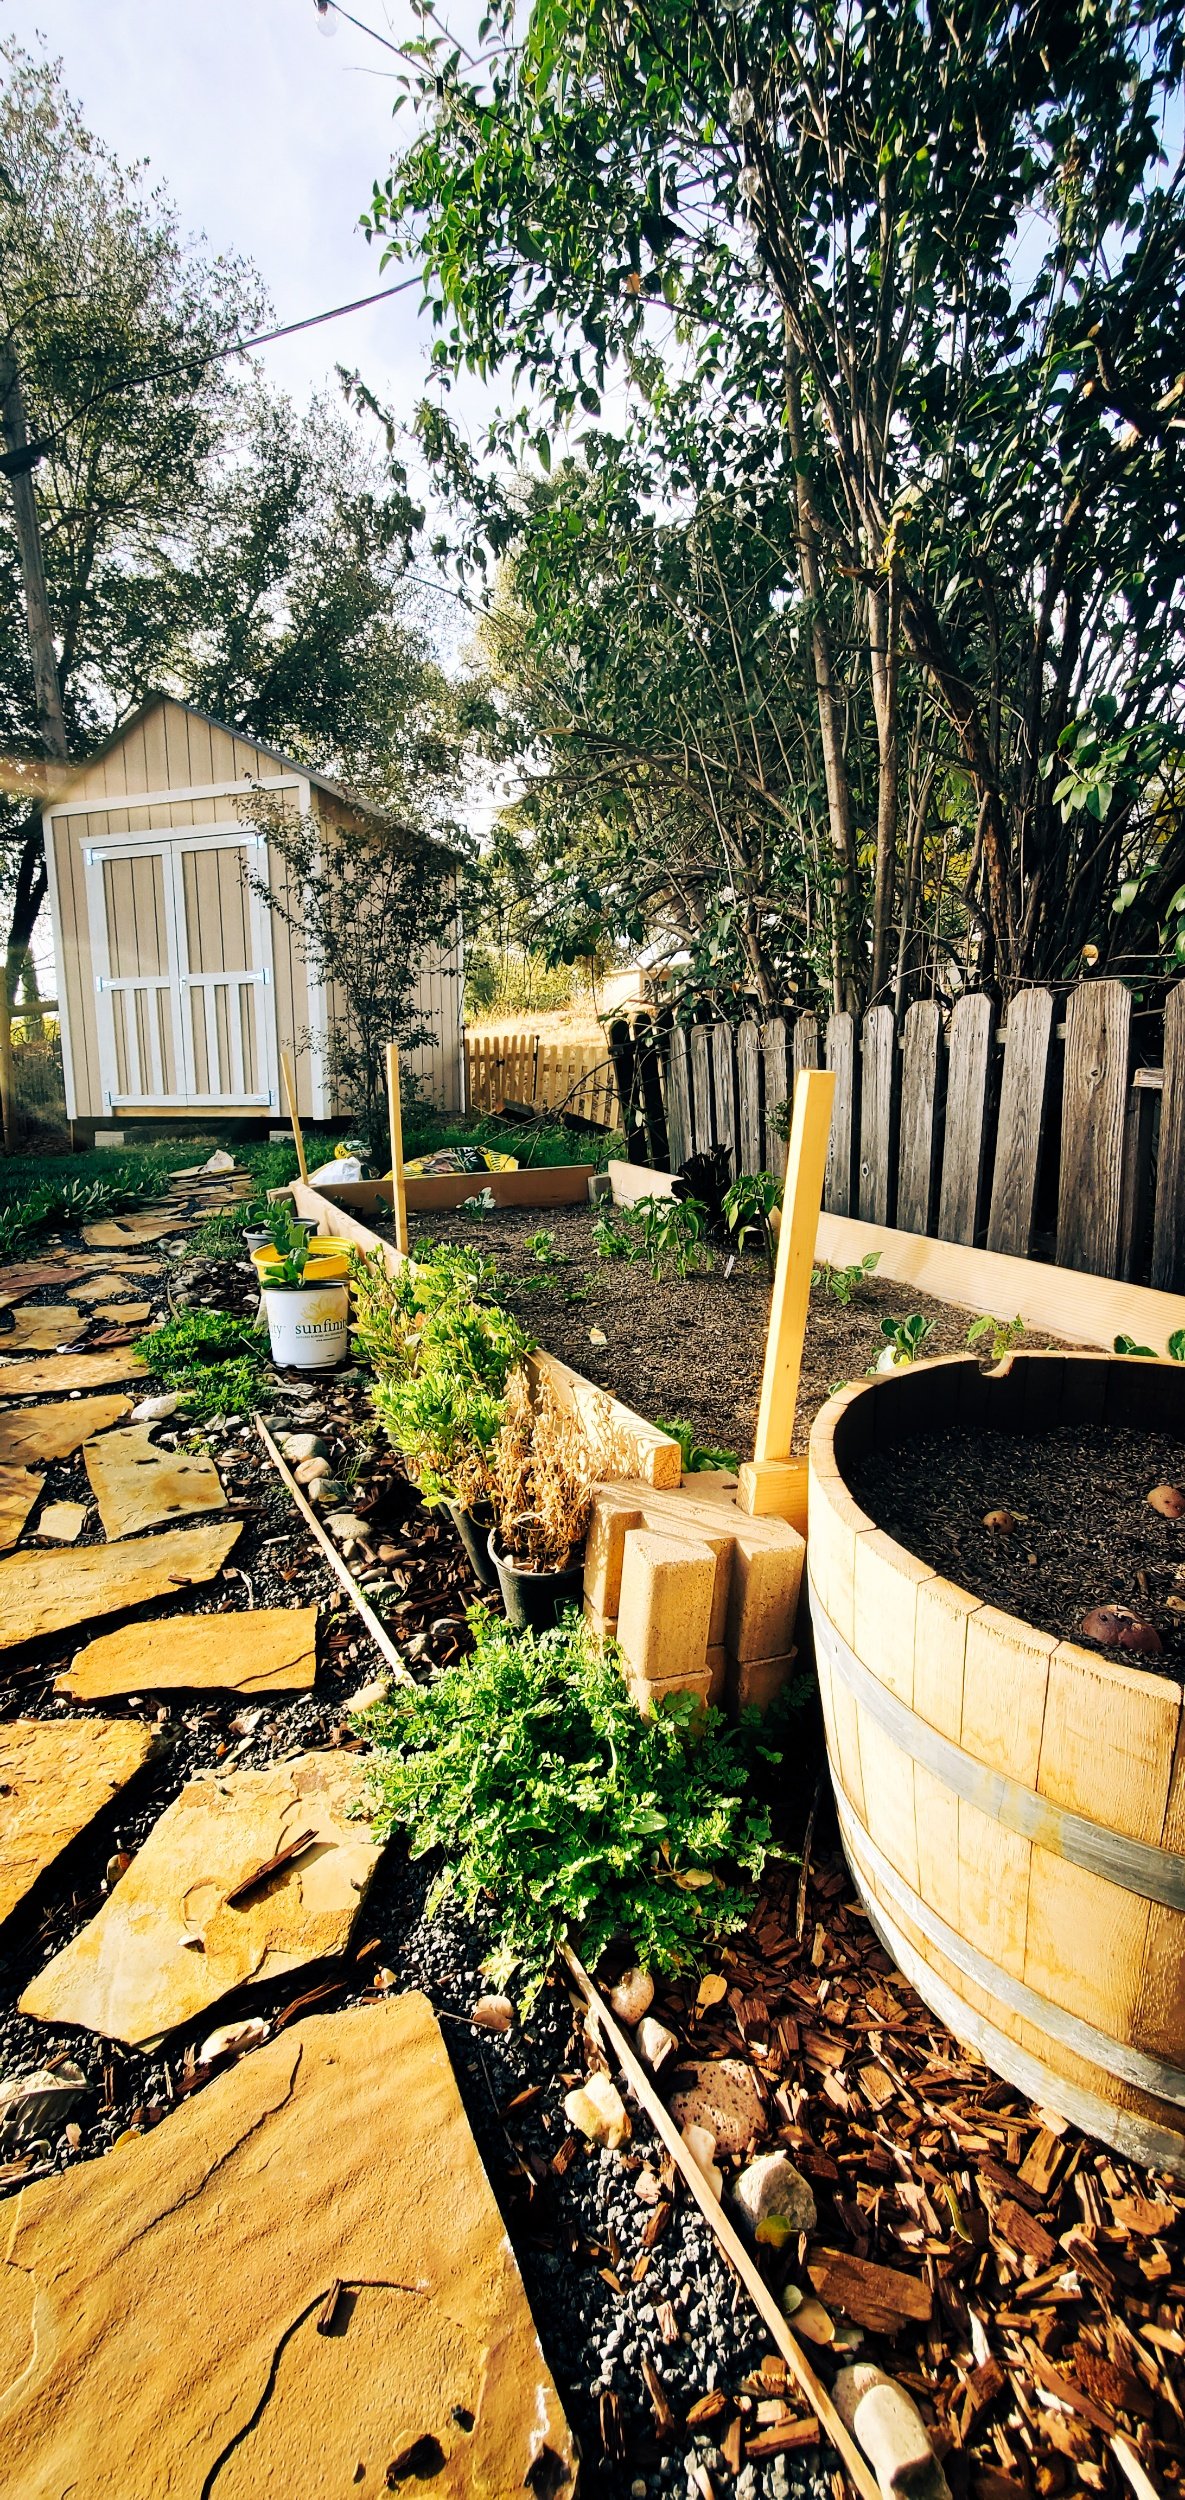 How to make a simple outdoor vegetable garden by Bessie Roaming